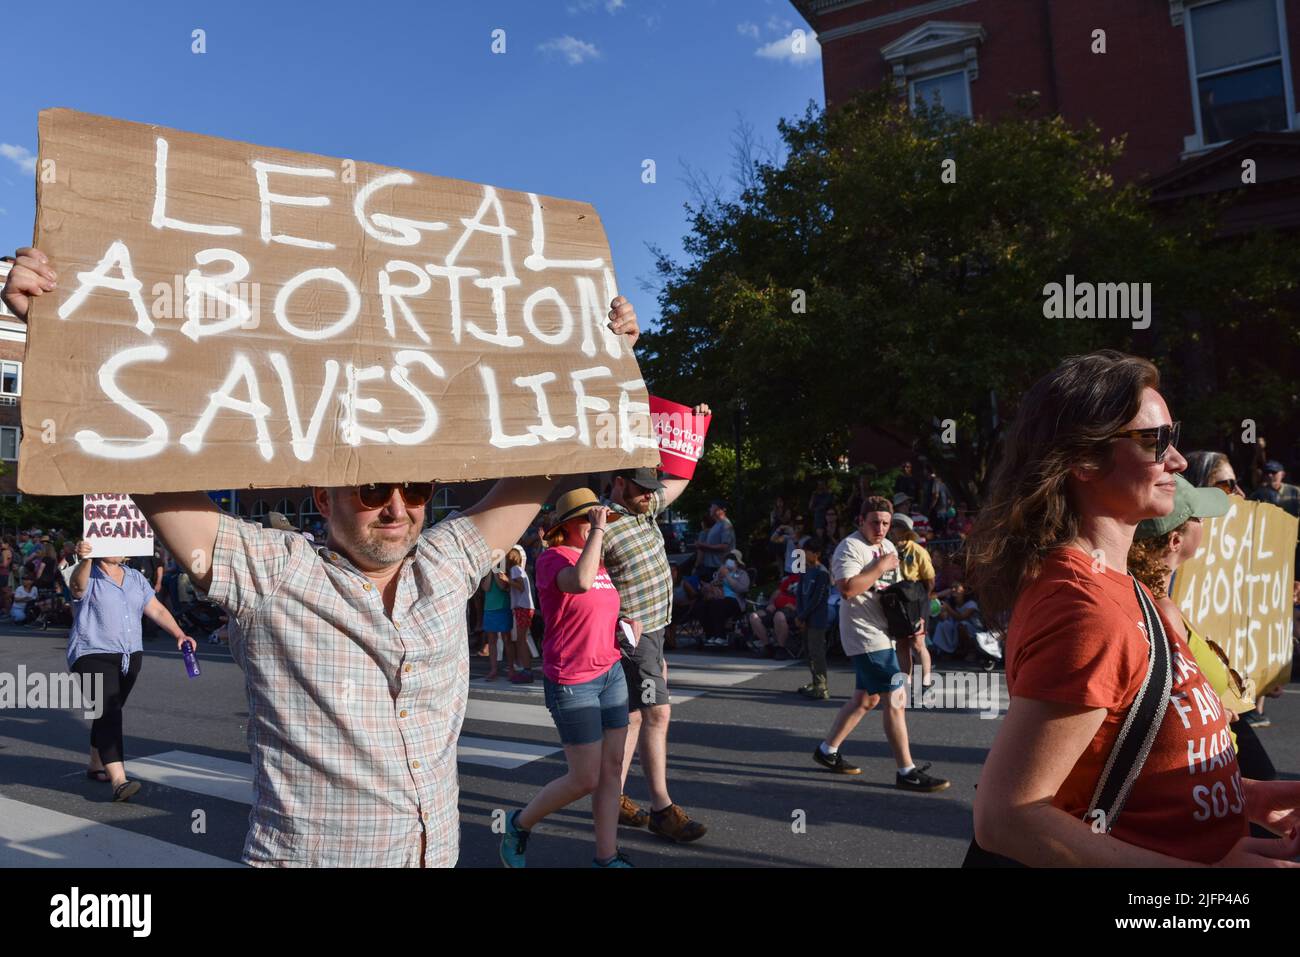 Abortion rights advocates carrying abortion rights signs march in the Montpelier, VT, USA, July 4 parade. Stock Photo